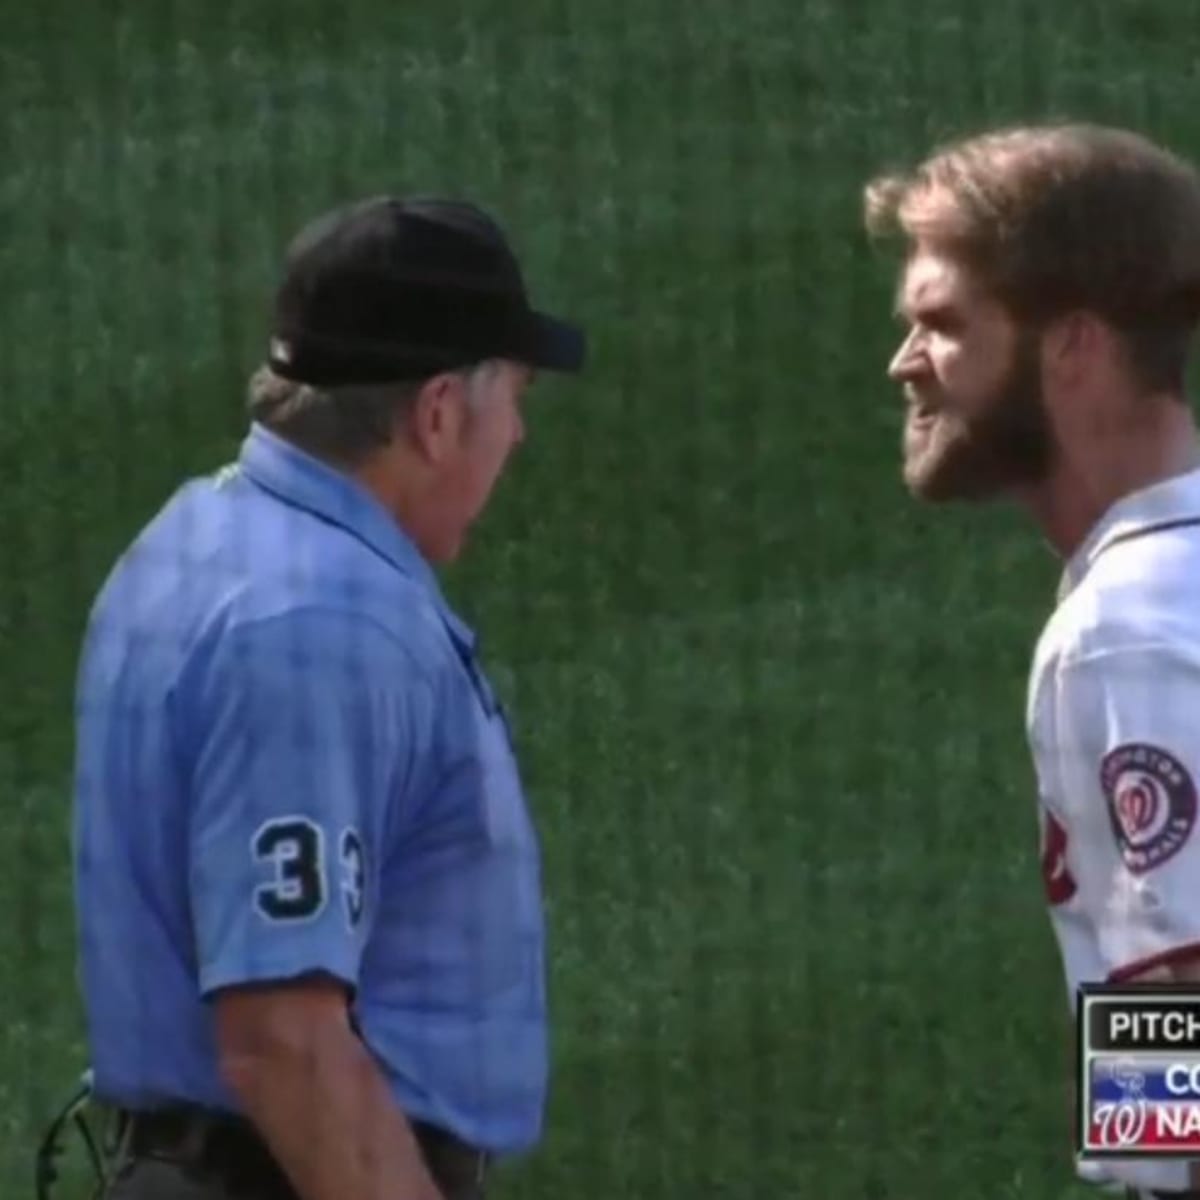 Bryce Harper ejected after furiously throwing helmet and yelling at umpire